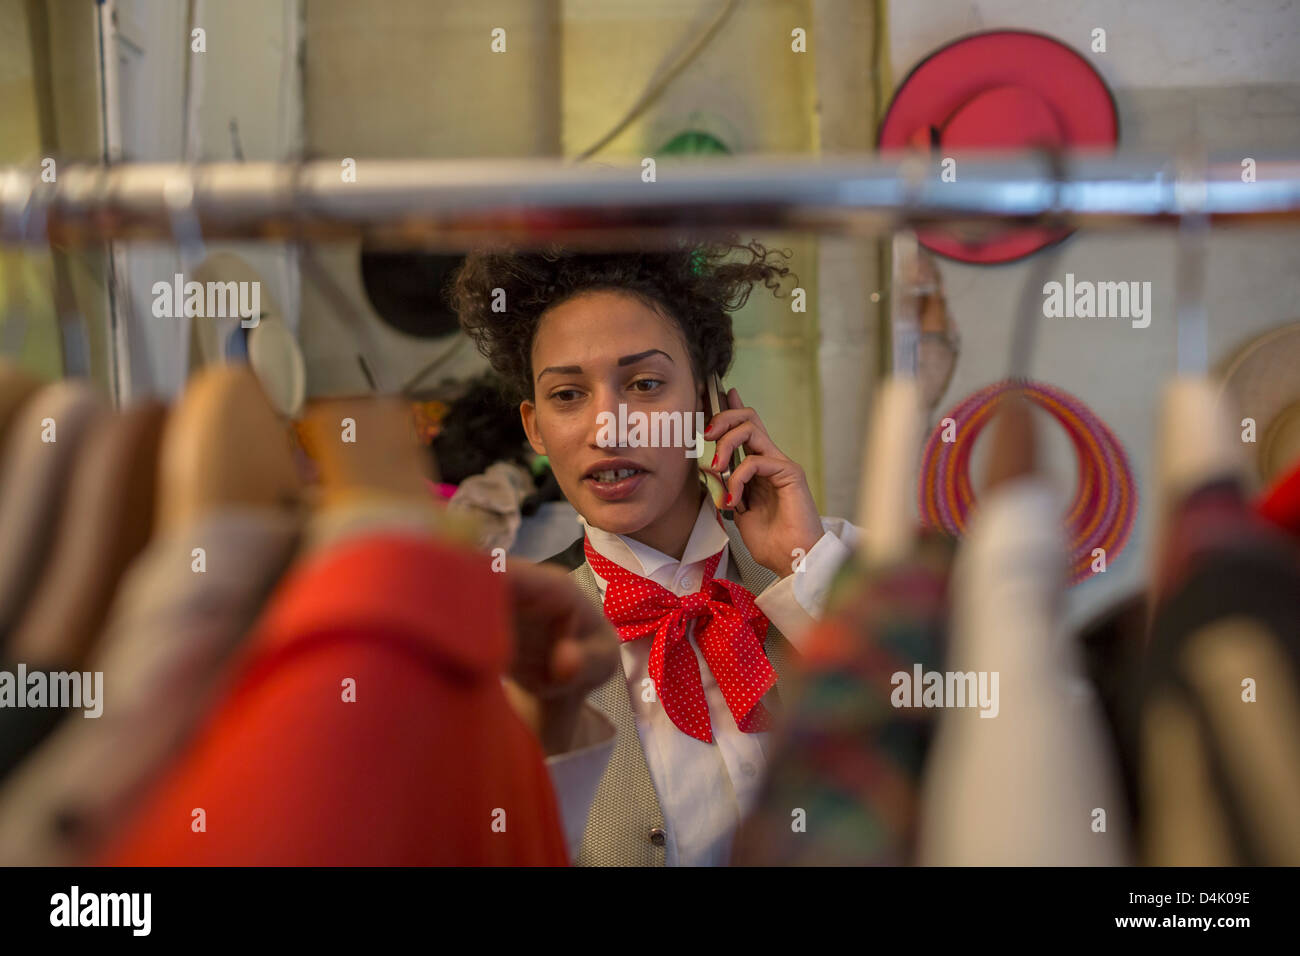 Woman on cell phone in clothes shop Stock Photo